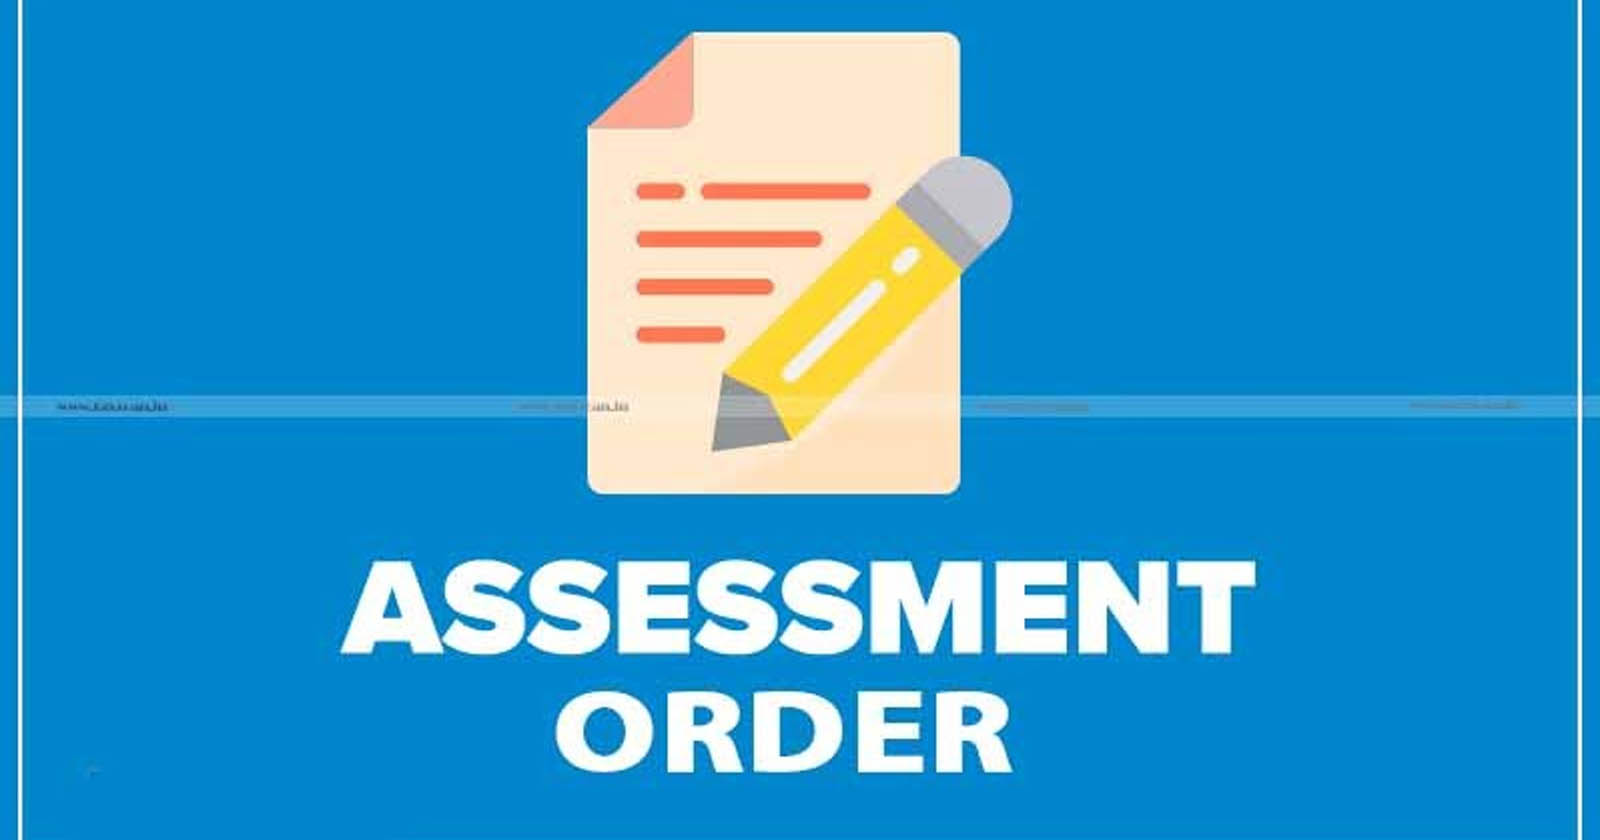 transferring cases of authorities from one jurisdiction to another - ITAT upholds assessment order -transferring cases of authorities - assessment order - ITAT - taxscan